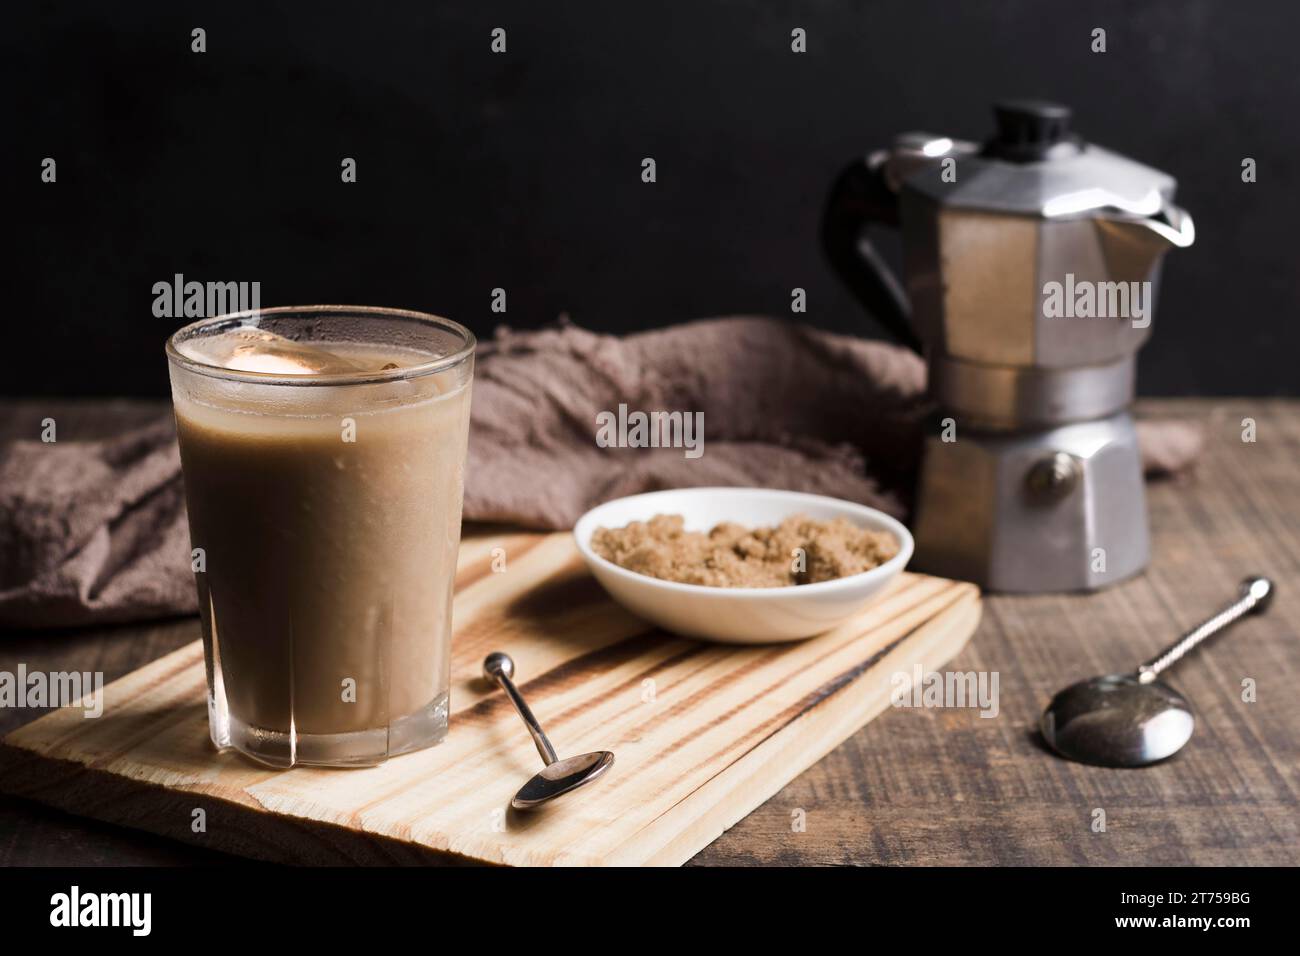 Coffee with ice cubes glass grinder Stock Photo